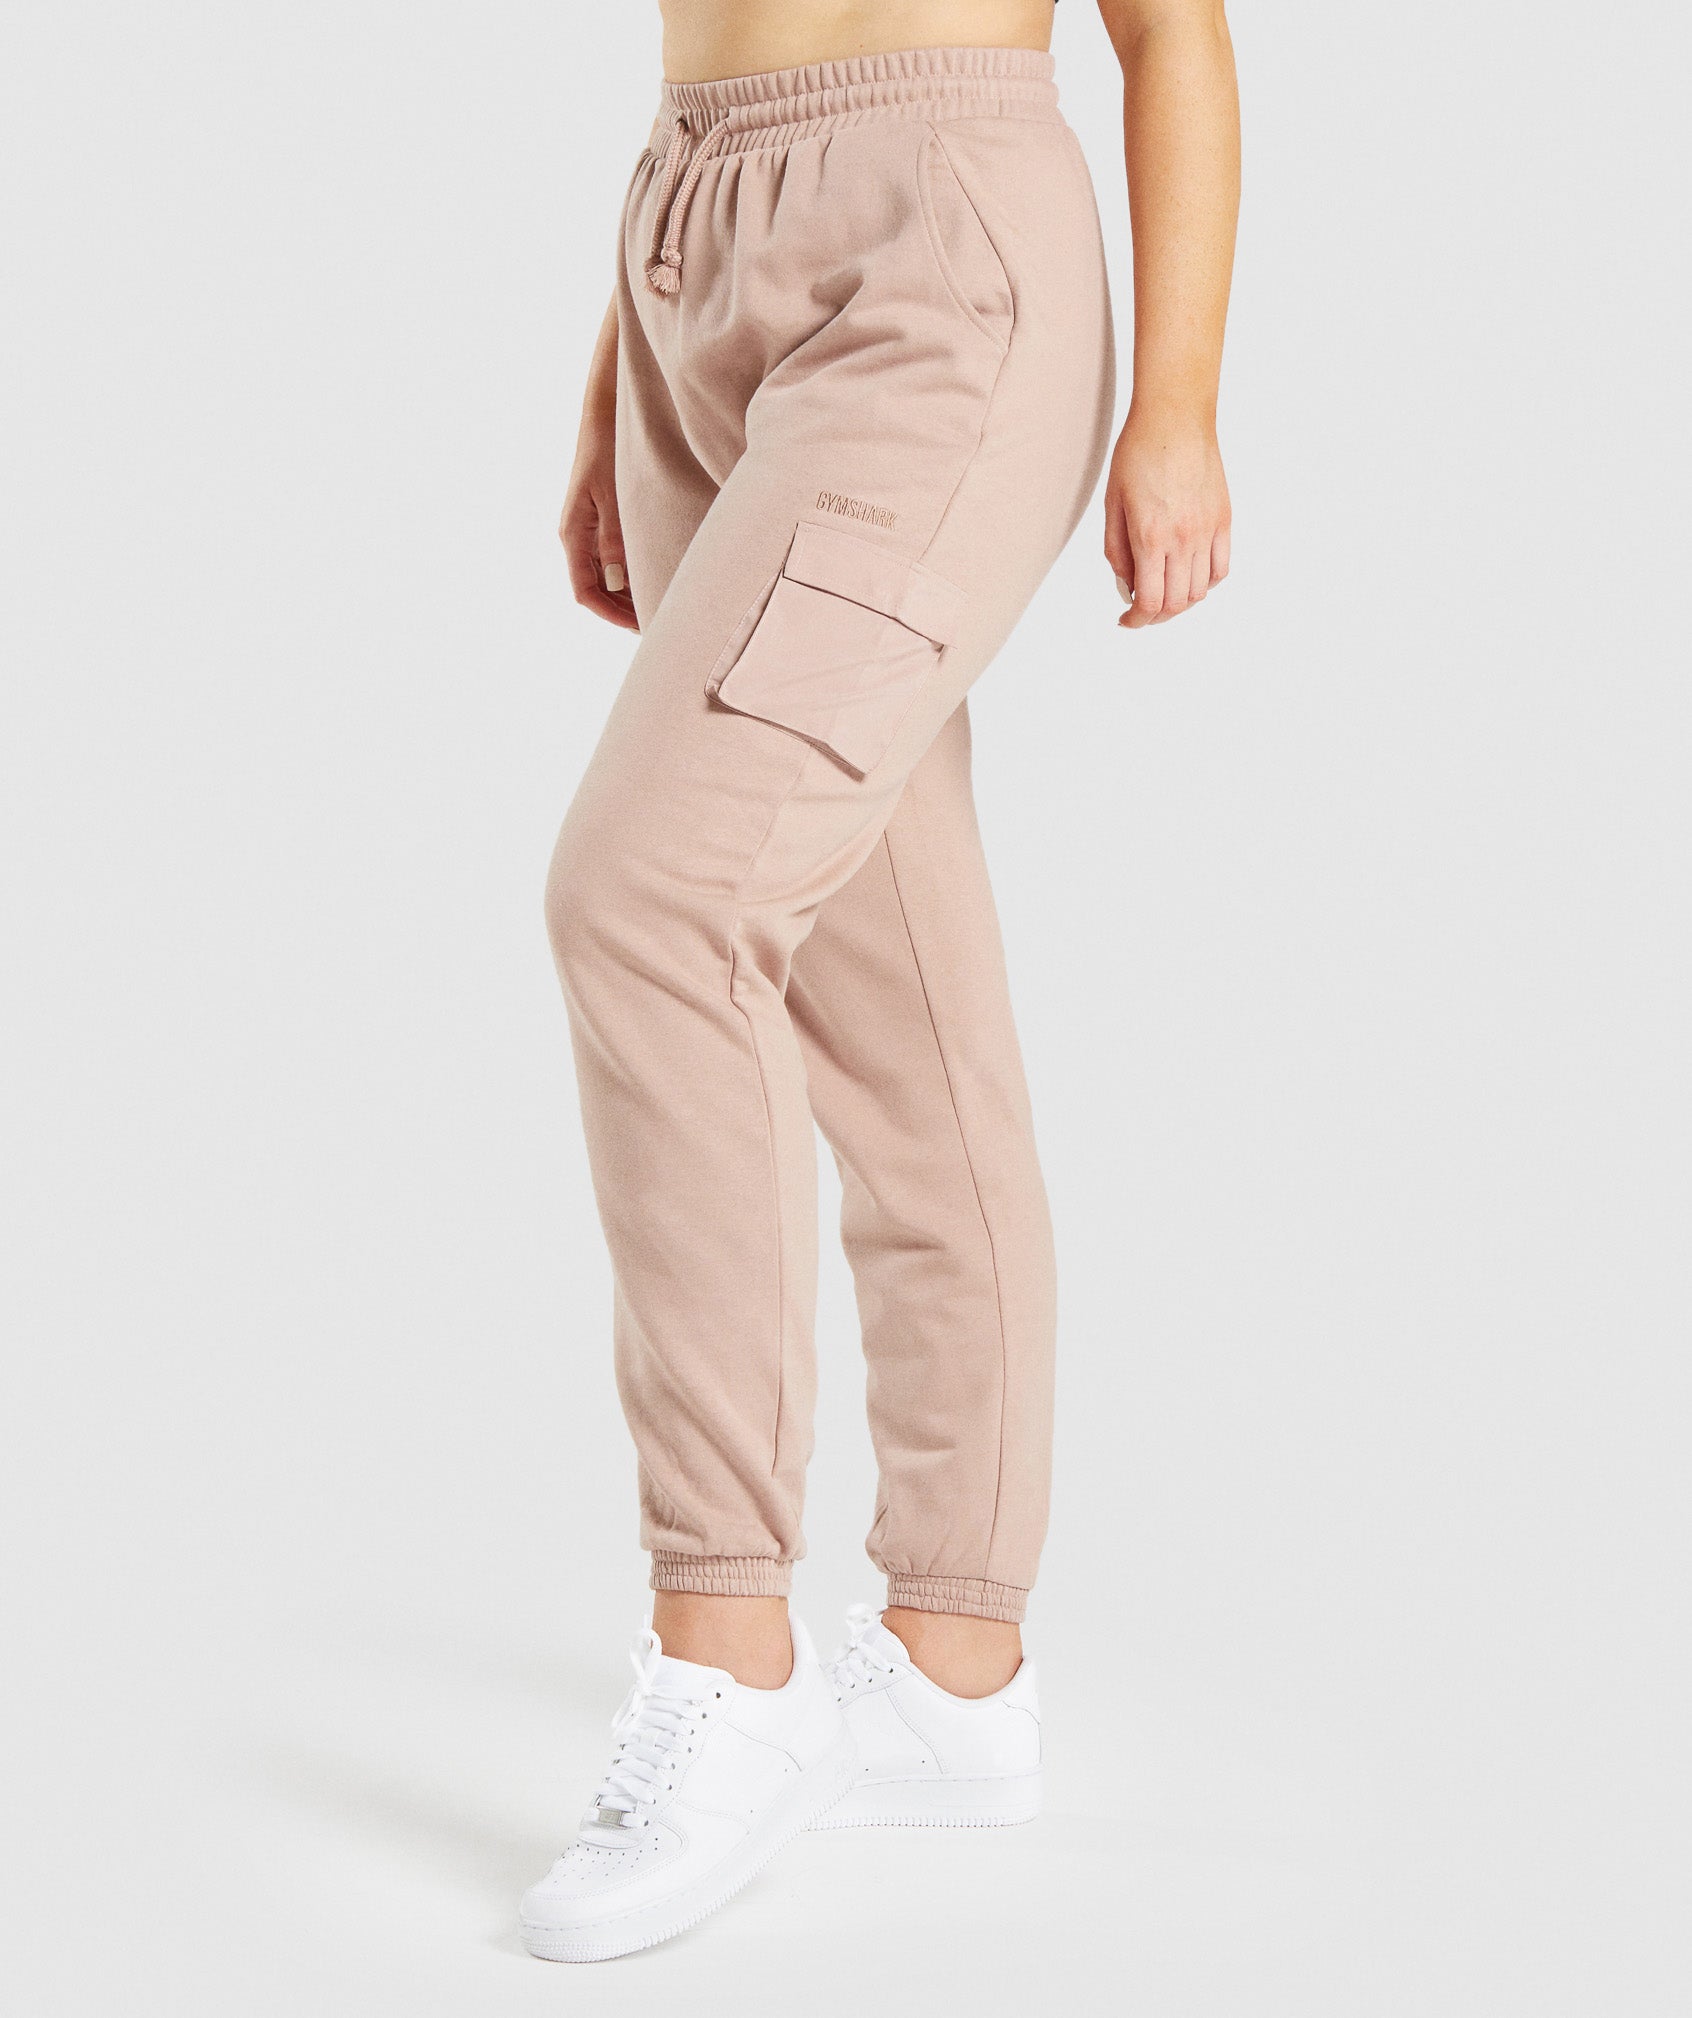 Release Joggers in Taupe - view 4